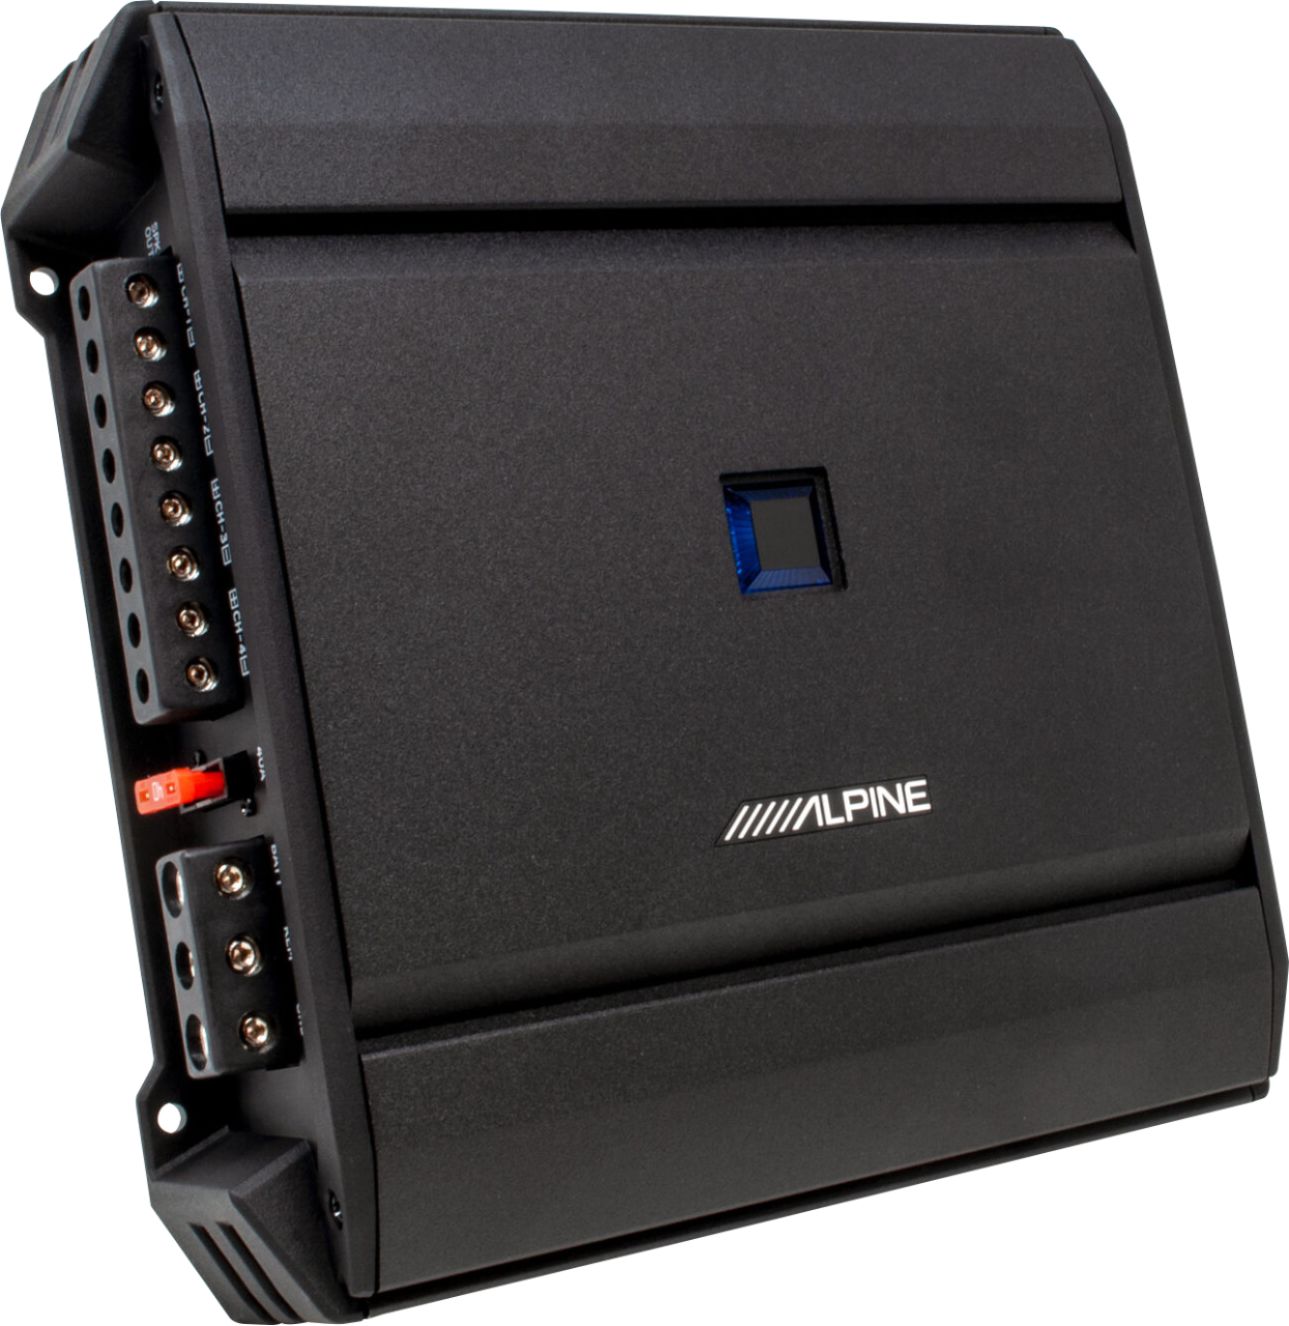 Angle View: Alpine - S-Series Class D Bridgeable Multichannel Amplifier with Variable Crossovers - Black